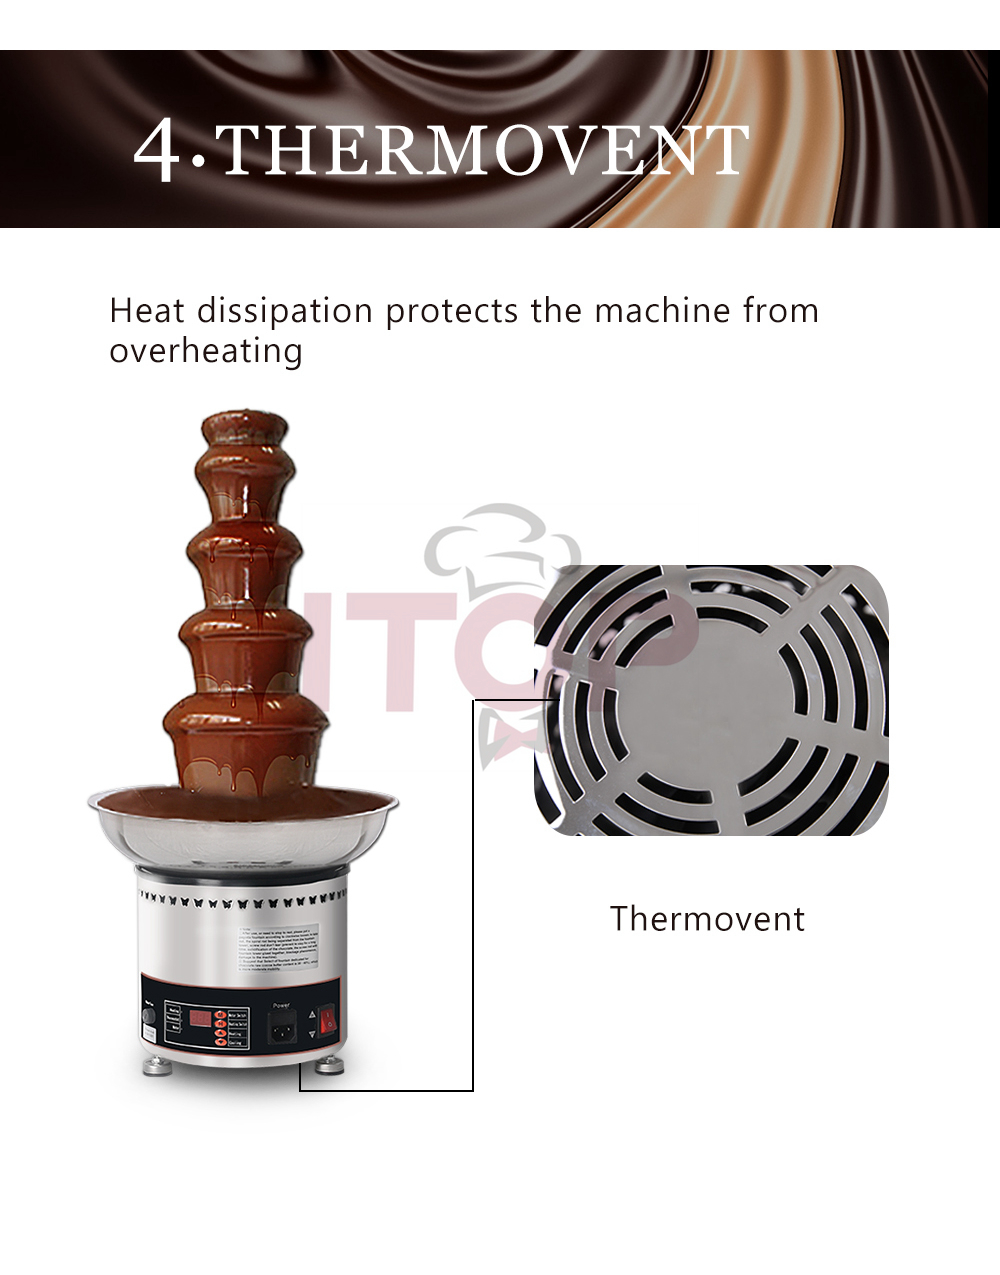 product detail of thermovent